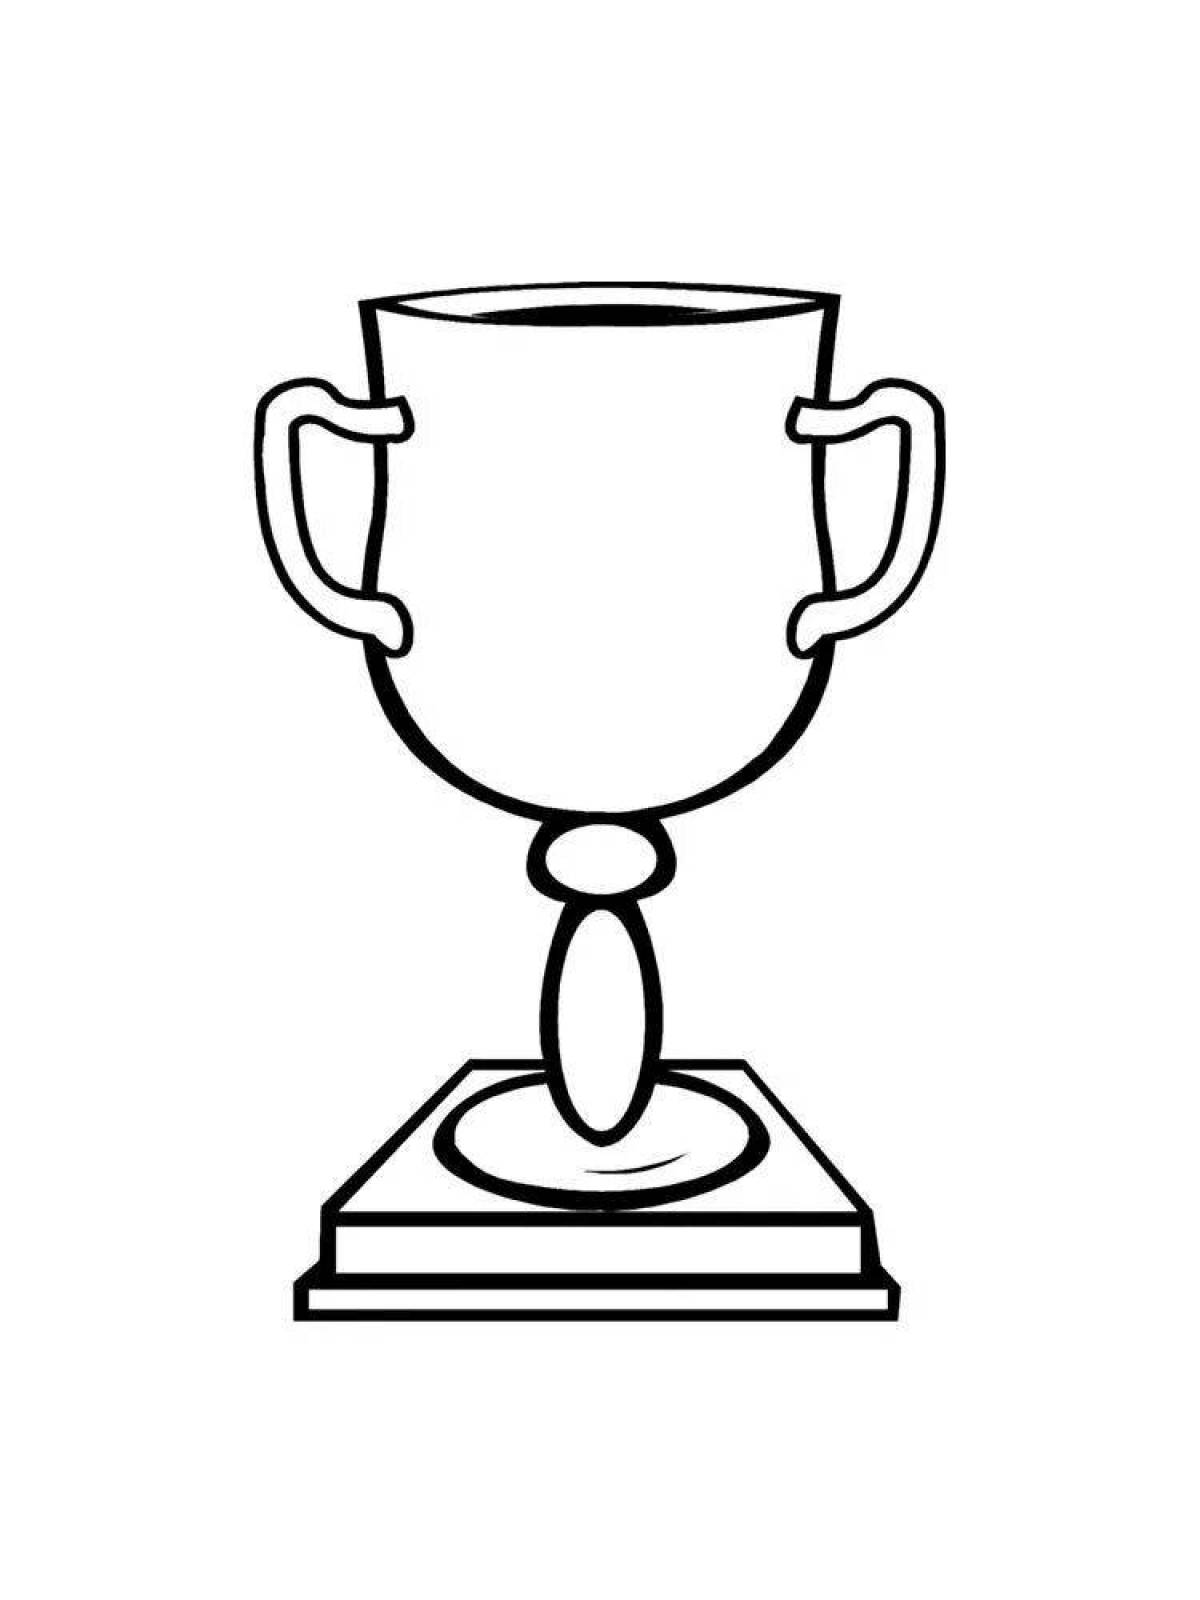 Coloring page unusual winner cup